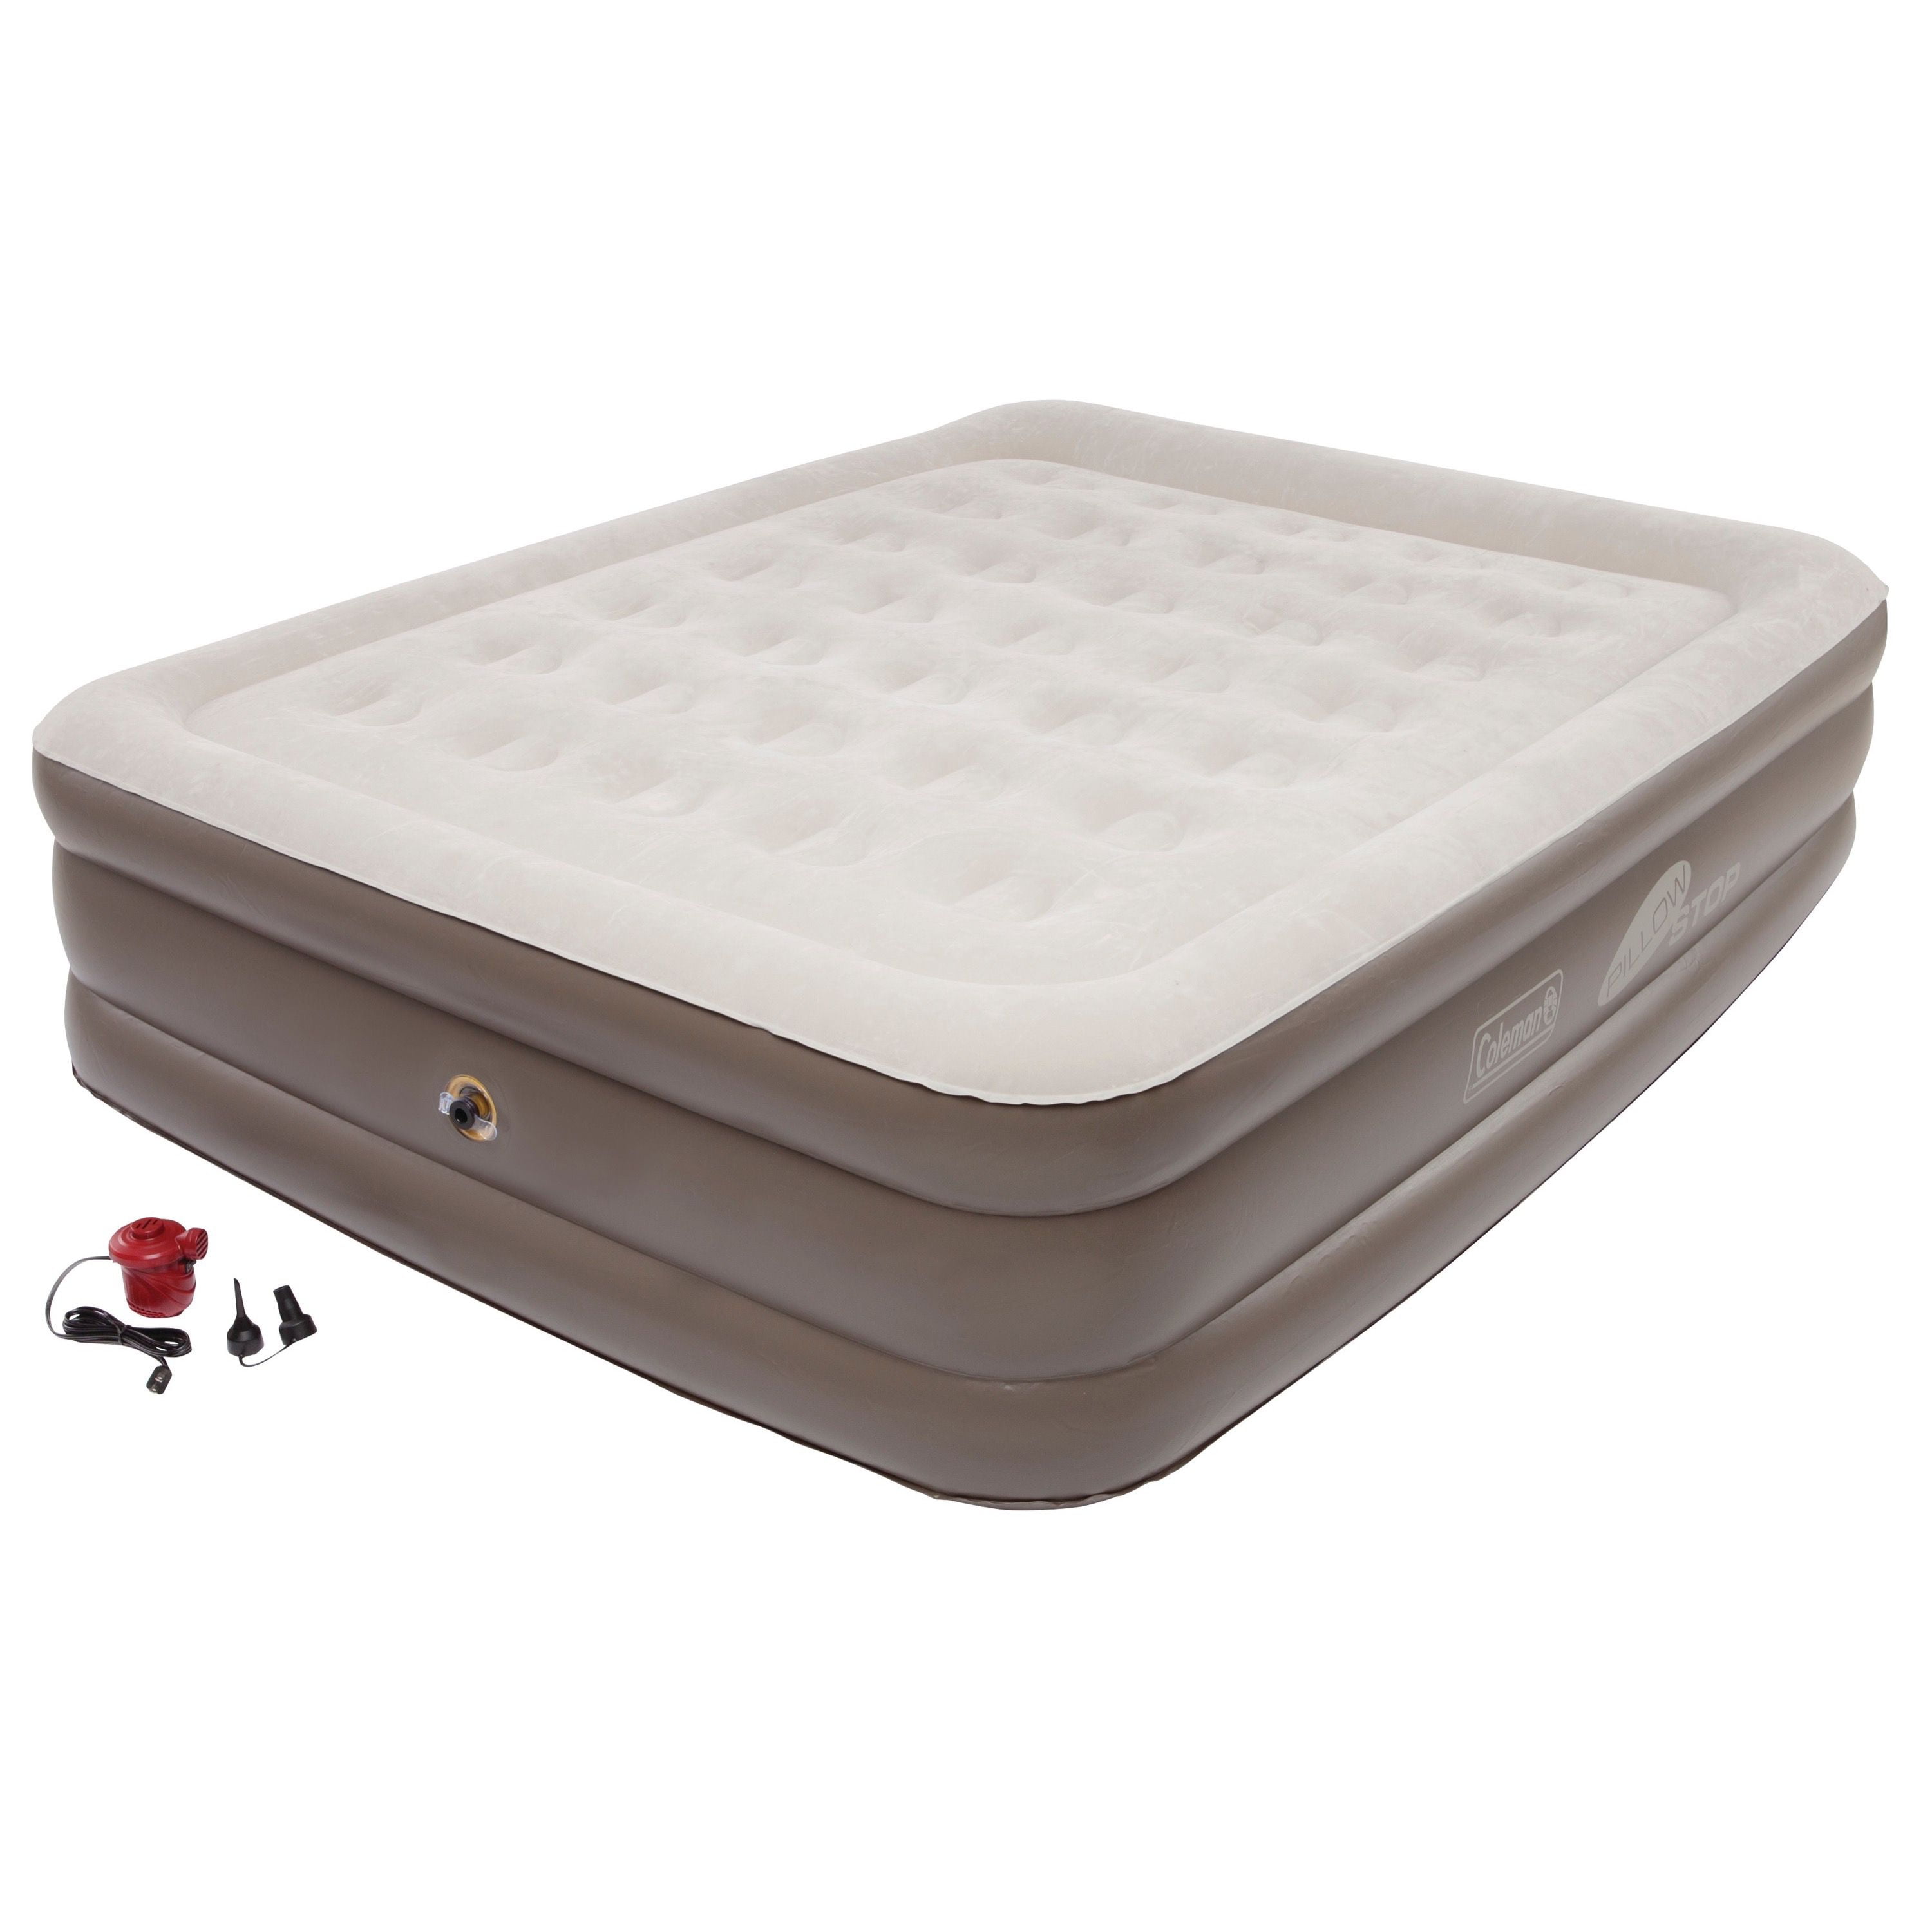 2000015764 Coleman Airbed Queen Extra High 4d BIP C002 for sale online 